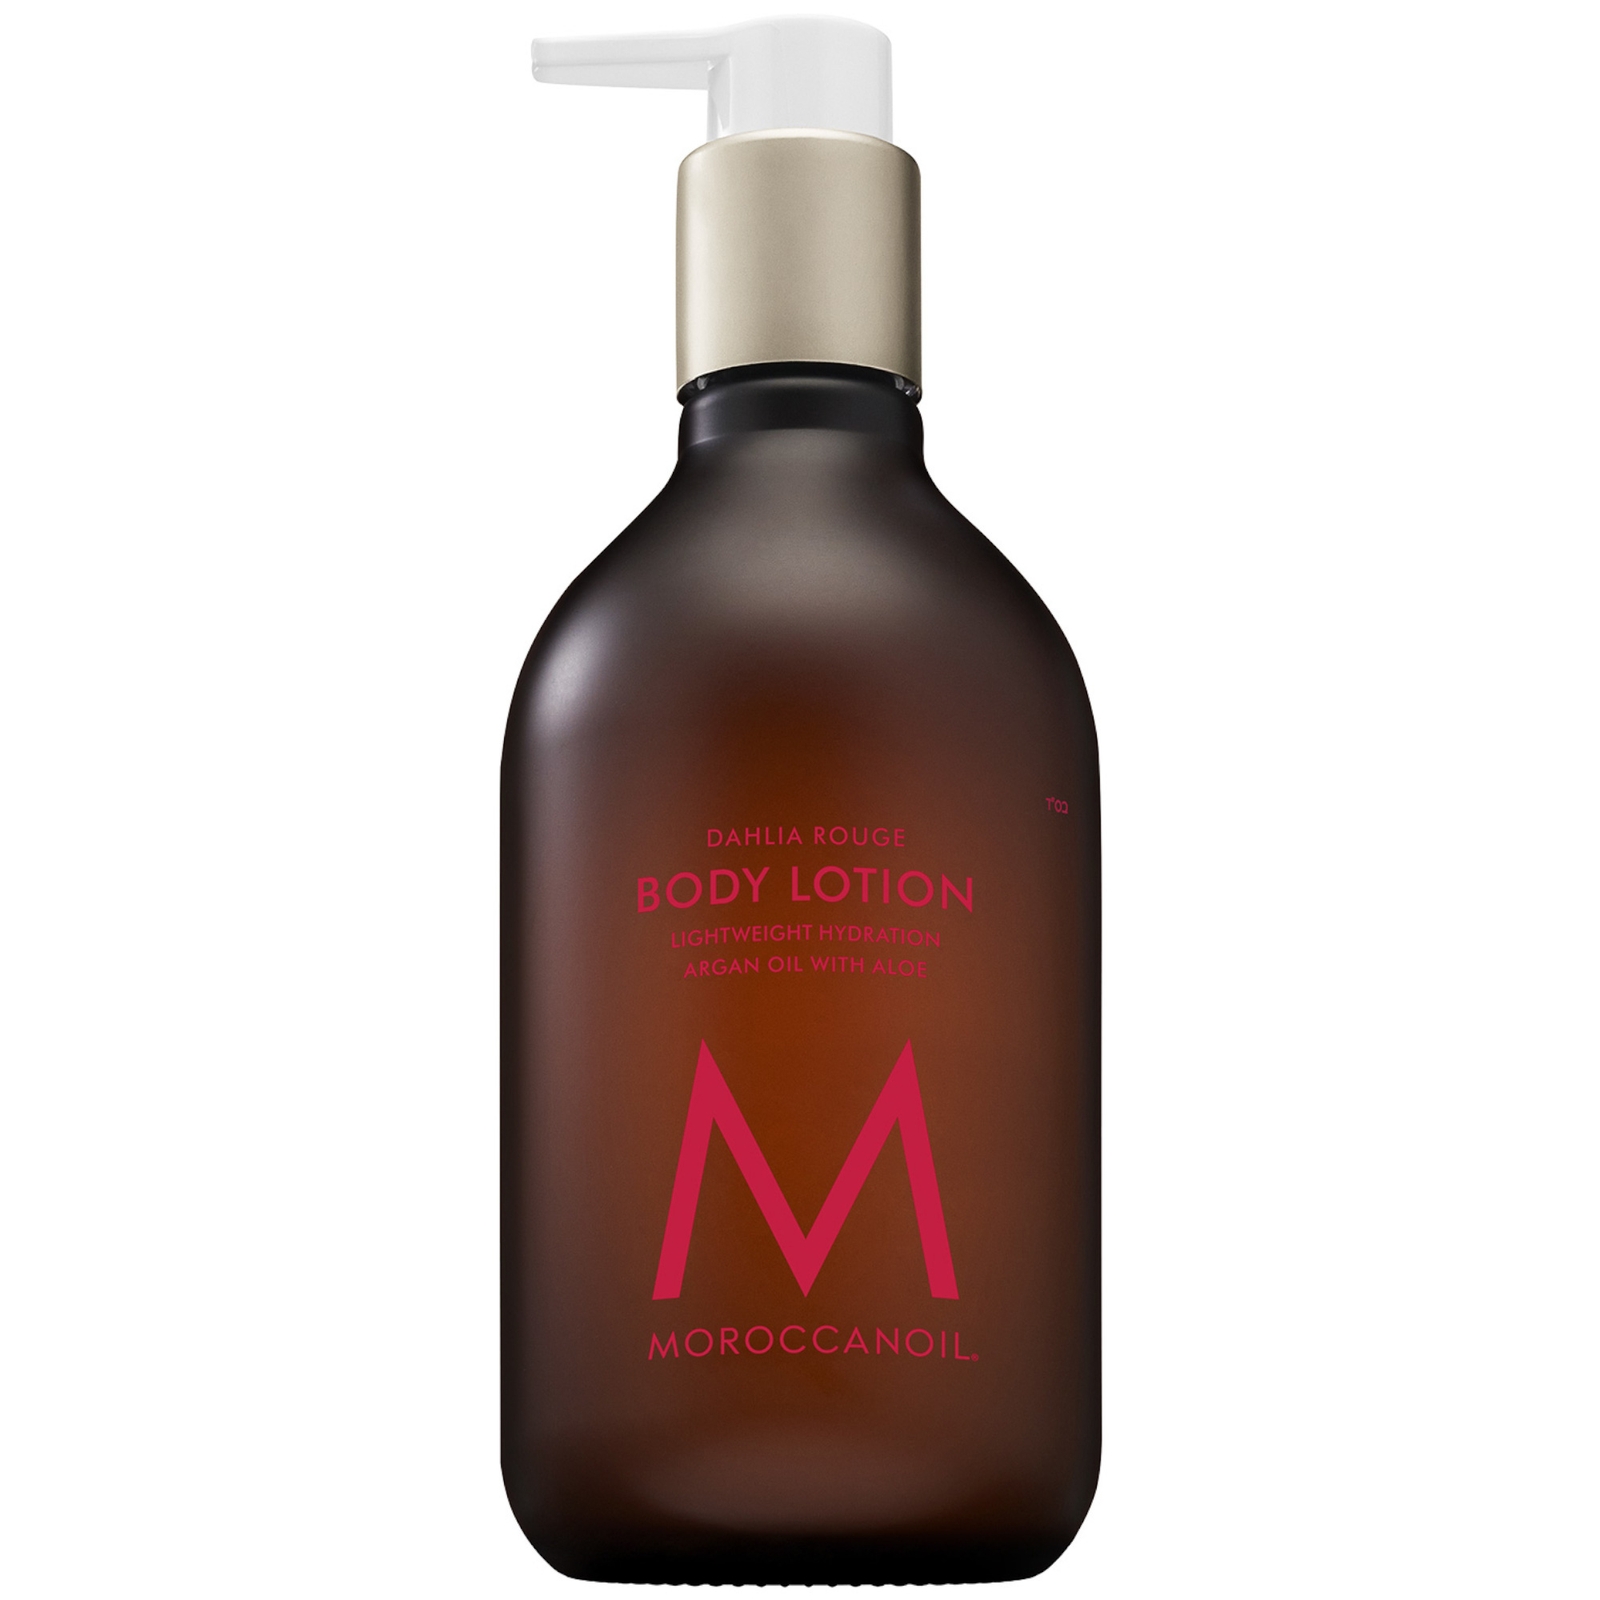 Moroccanoil Dahlia Rouge Body Lotion 360ml In Brown